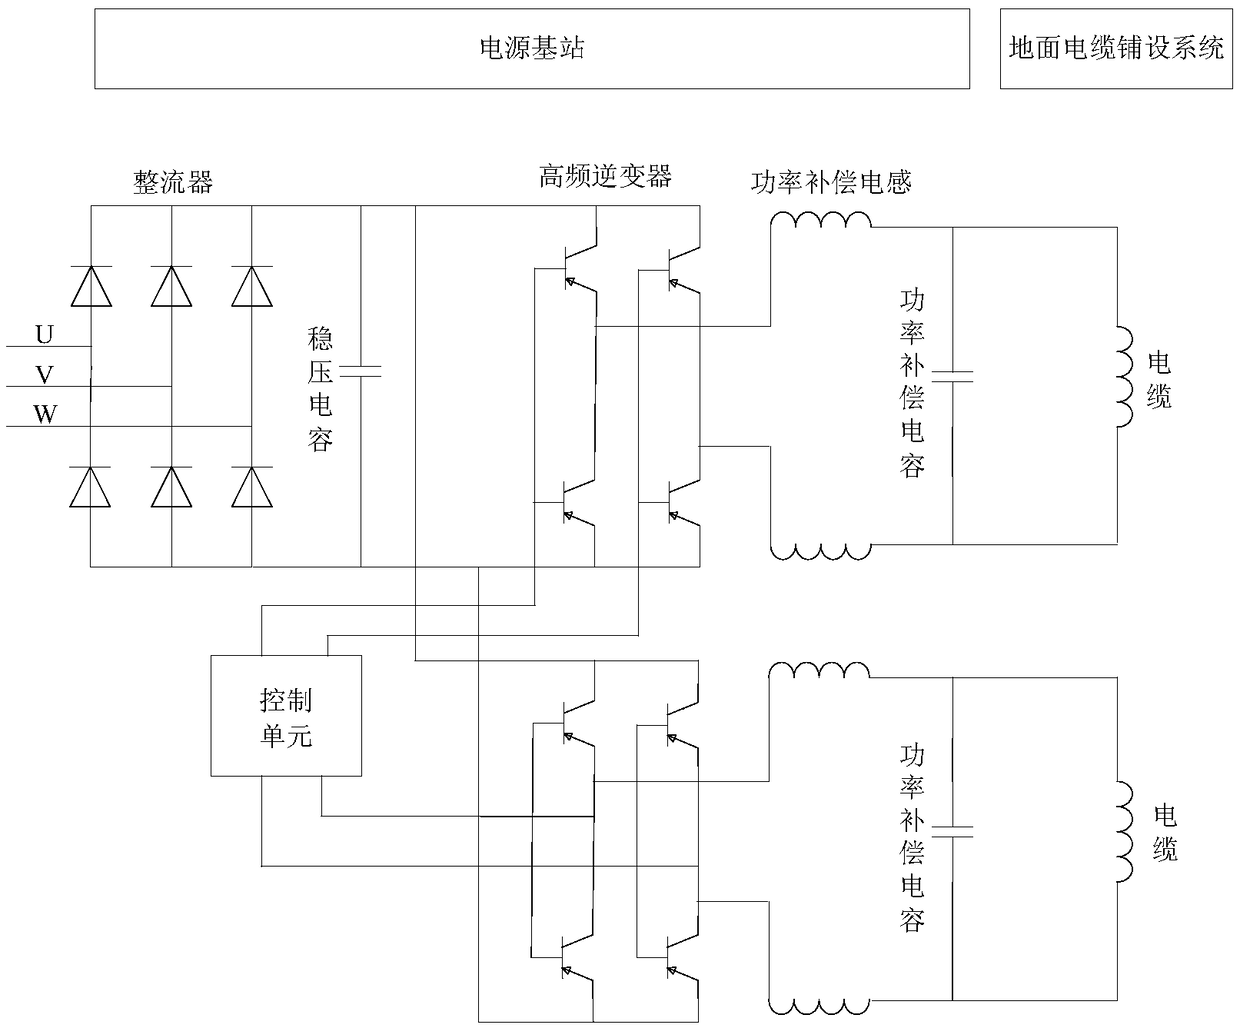 Electromagnetic induction power transfer system